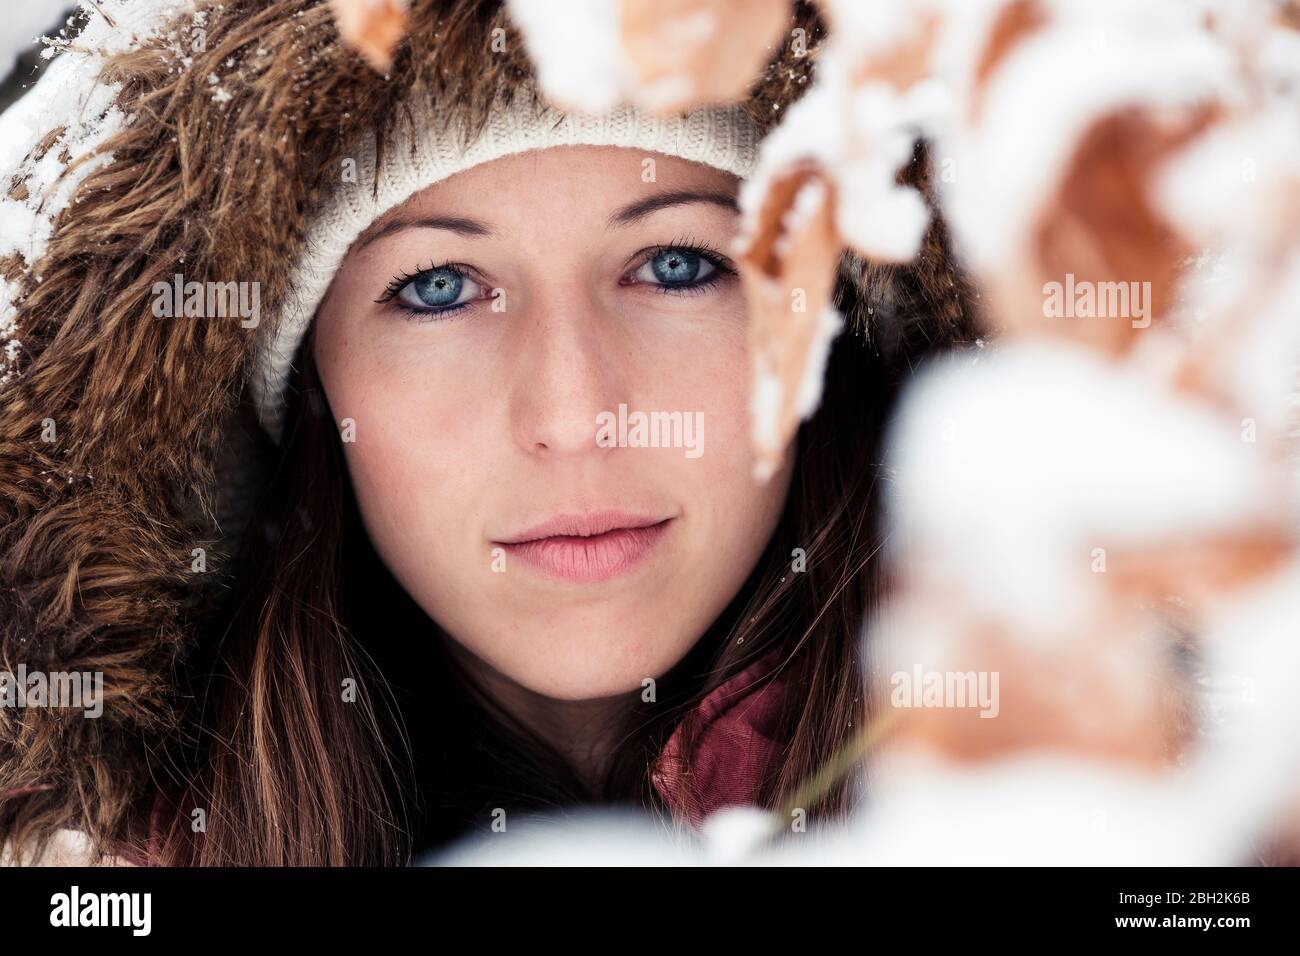 Portrait of young woman with blue eyes in winter Stock Photo